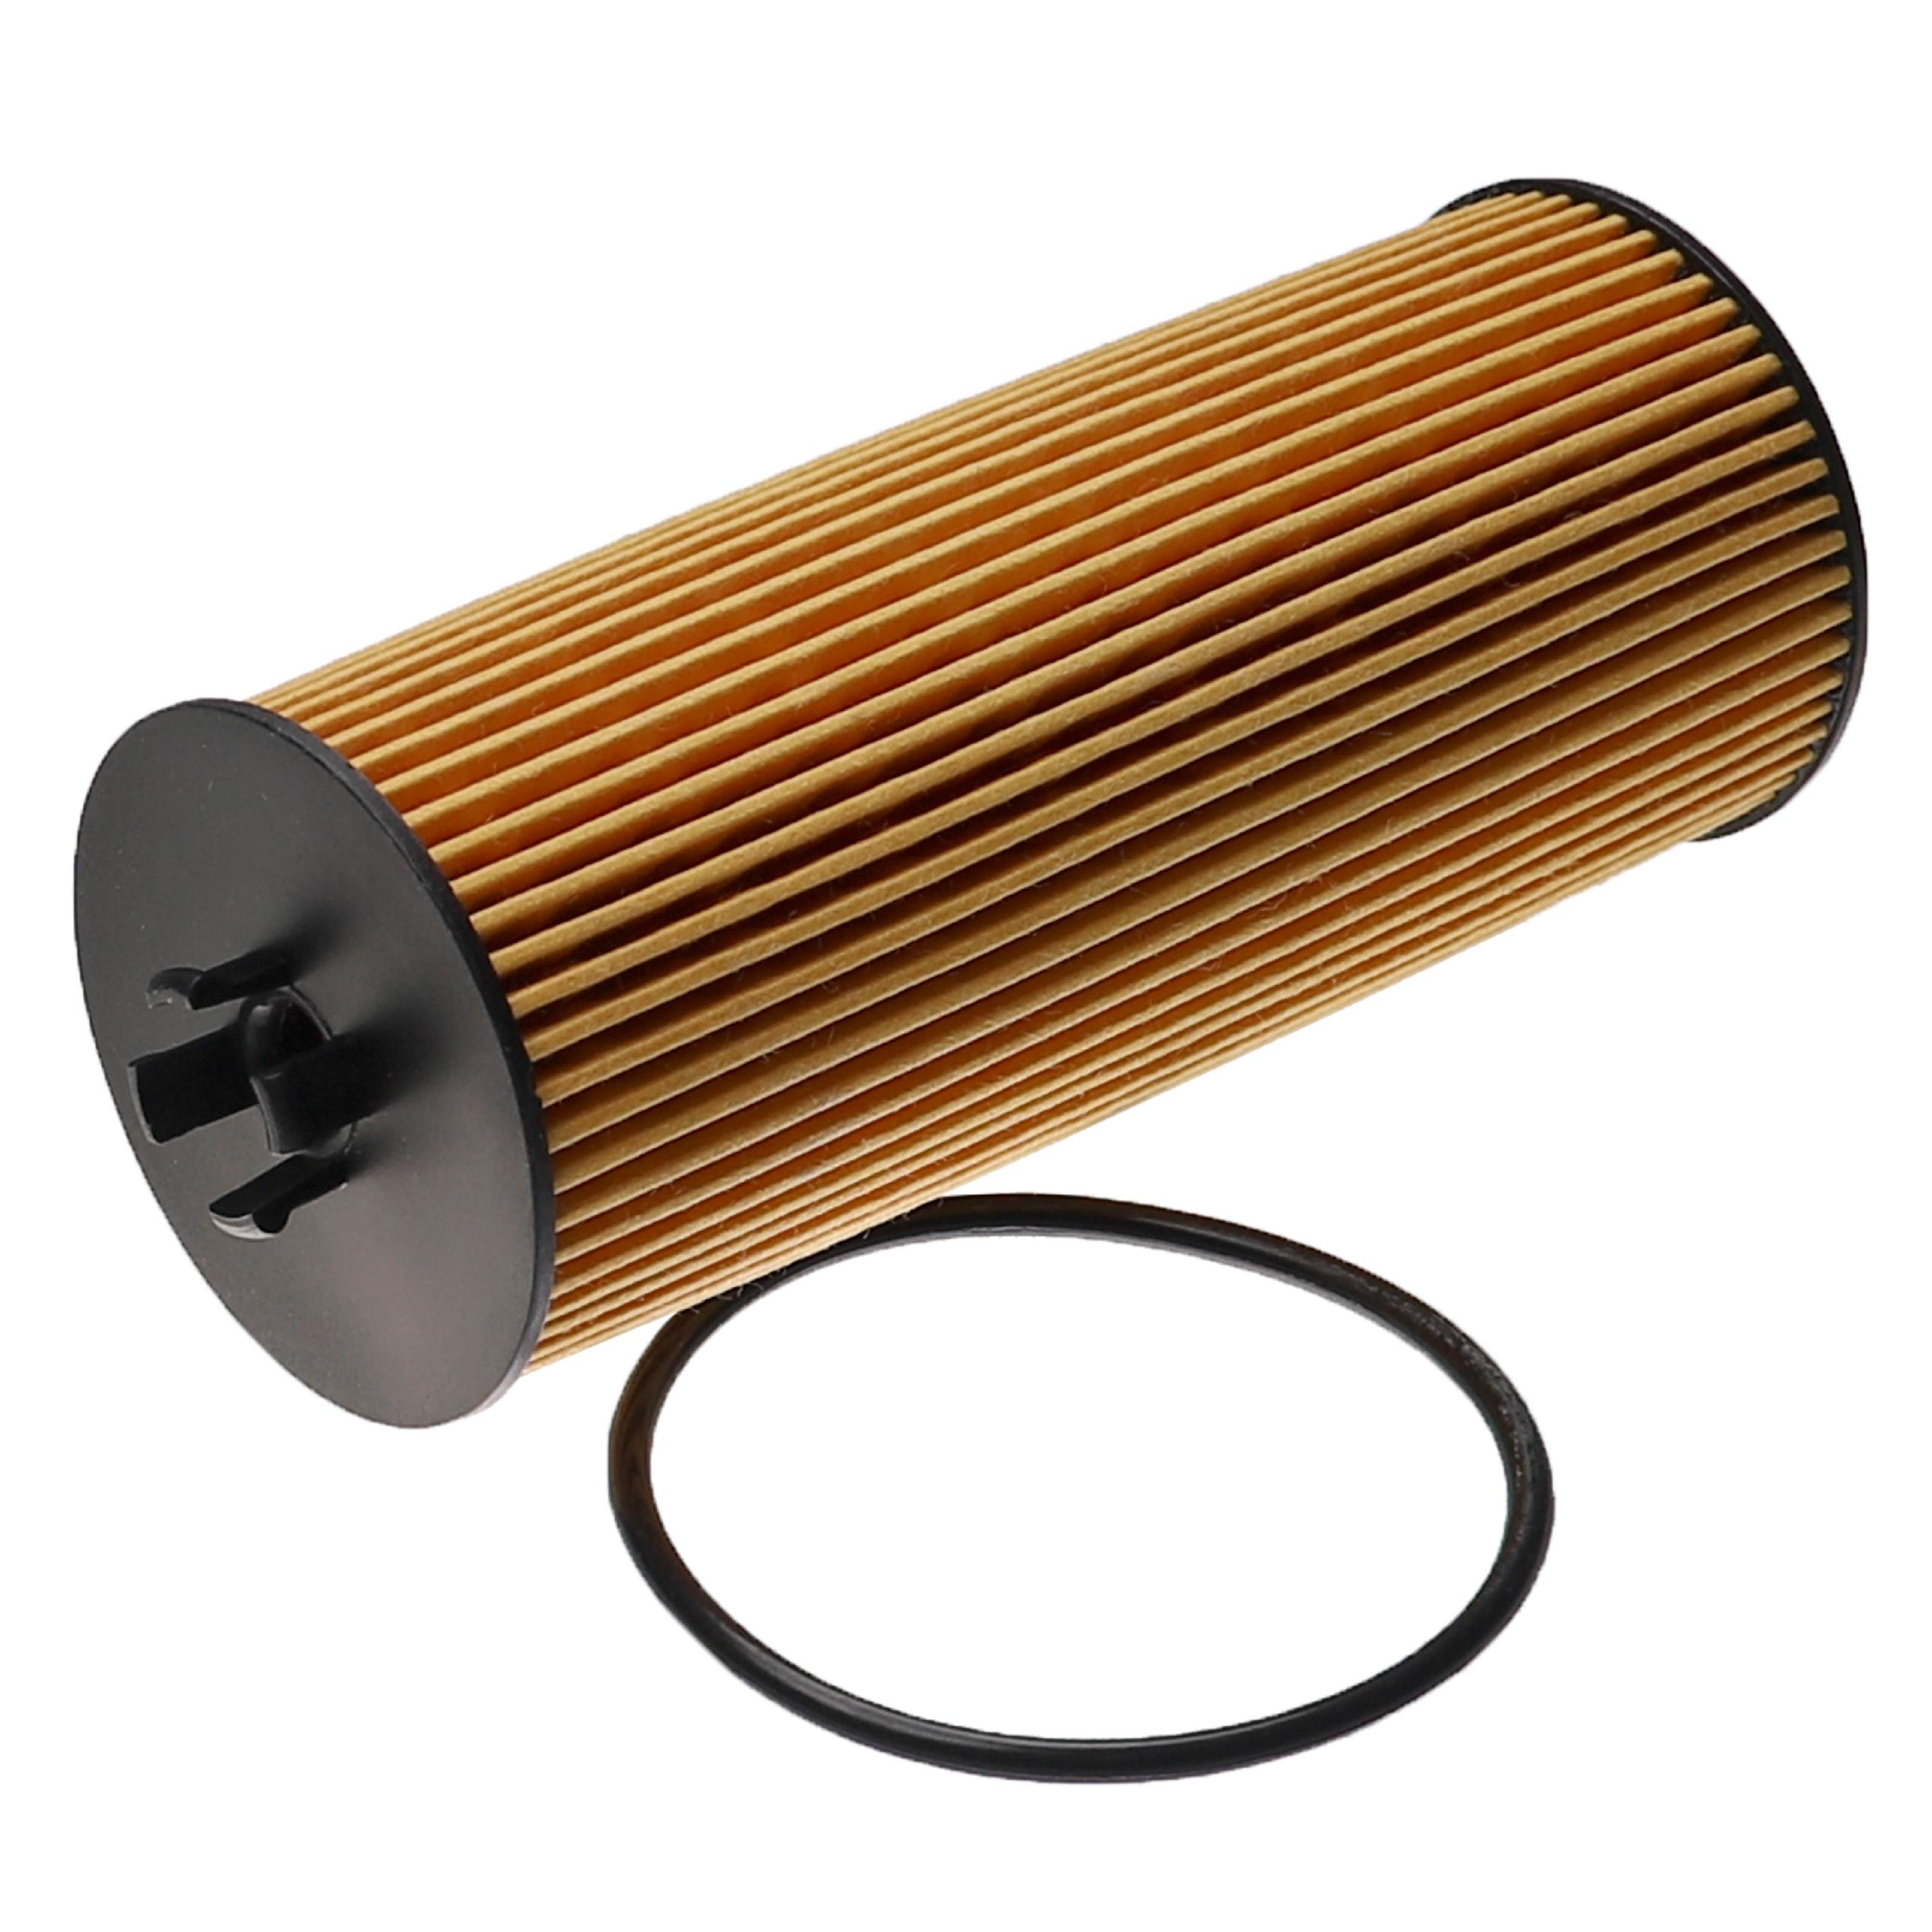 Vehicle Oil Filter as Replacement for A.L. filter ALO-8103 - Spare Filter